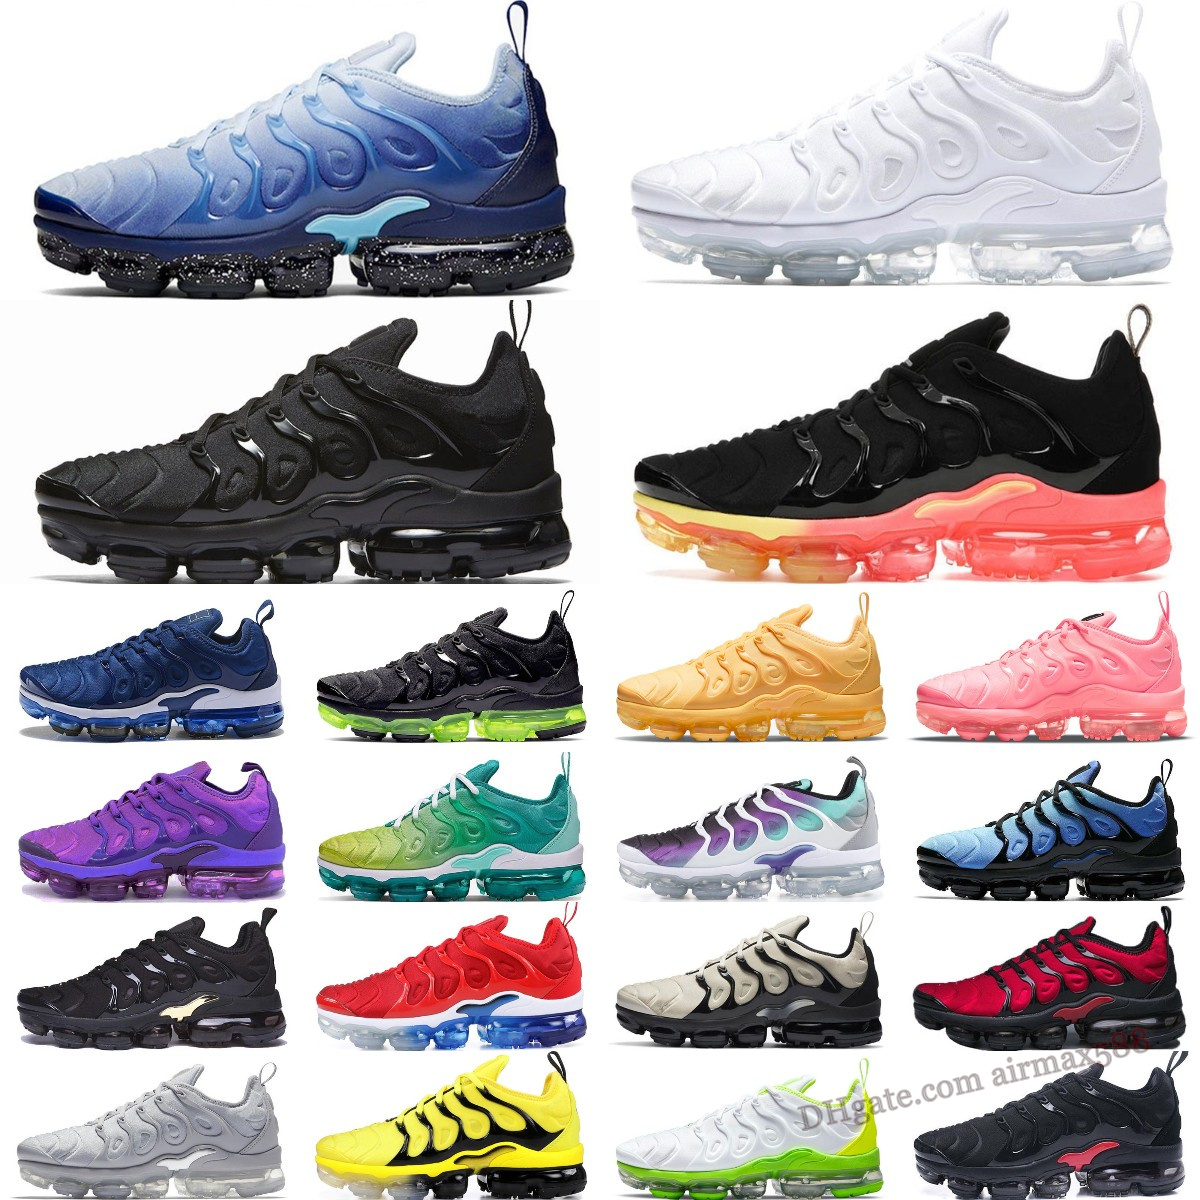 

New TN Plus Running Shoes For Men Women Eur size 36-47 Black Bubblegum Yolk Cherry Cool Grey Neon Olive Pure Platinum Dark Blue Mens Womens Sports Trainers Sneakers, Please contact us for more colors